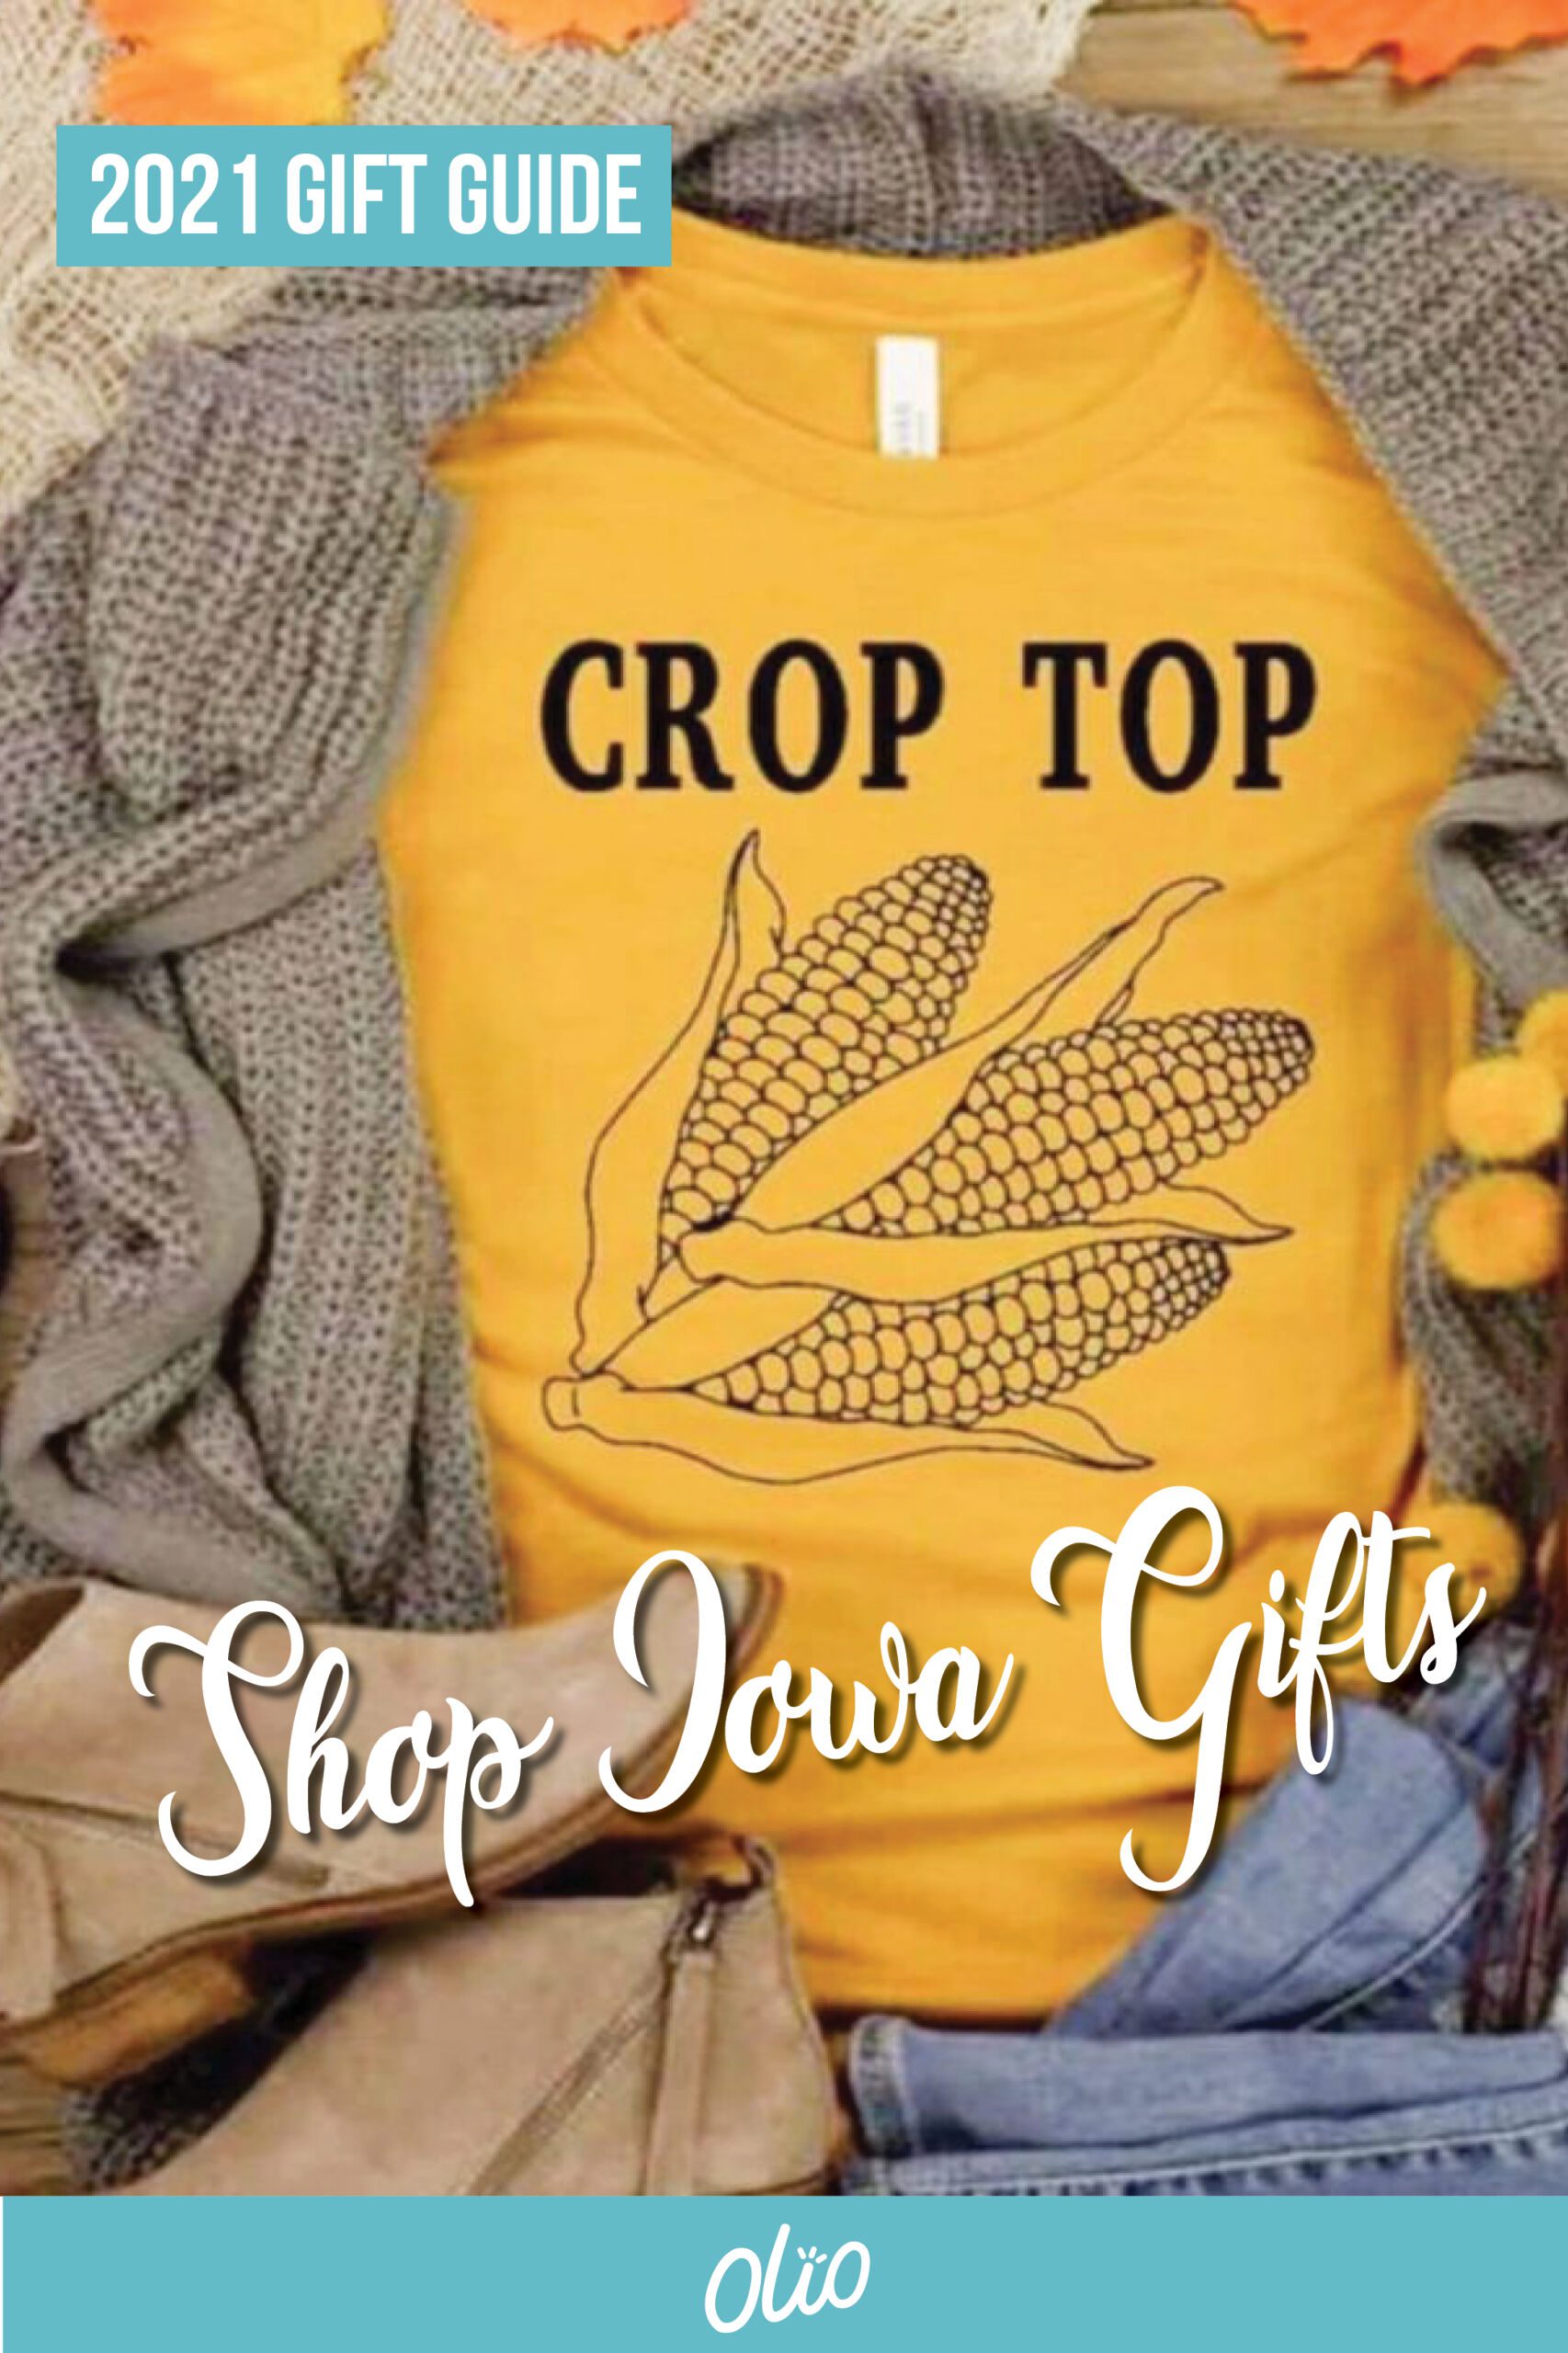 Shop small this holiday season with Shop Iowa! Shop Iowa lets you shop for gifts from businesses around the state all in one place. Discover gifts that are perfect for everyone on your holiday list today! #ad #giftguide #Iowa #ShopIowa #ThisIsIowa